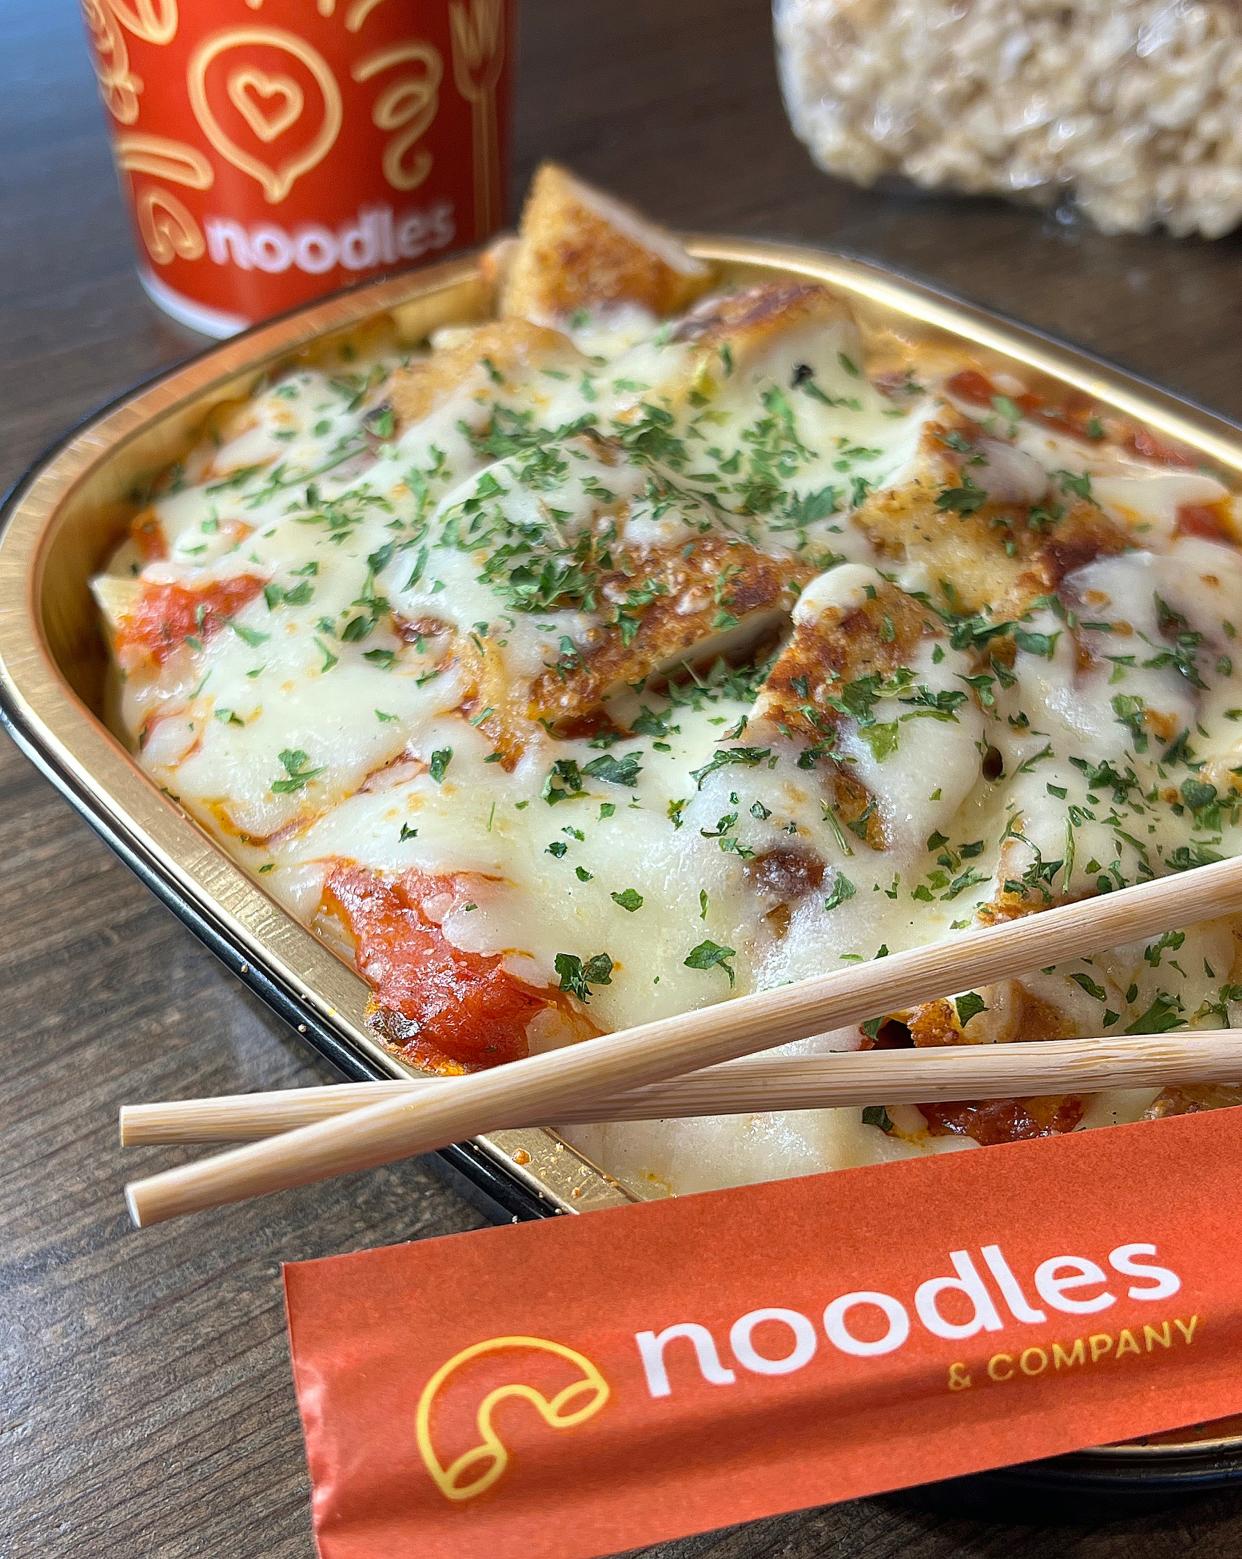 Noodles & Company's chicken parmesan dish at its newest location in Green.